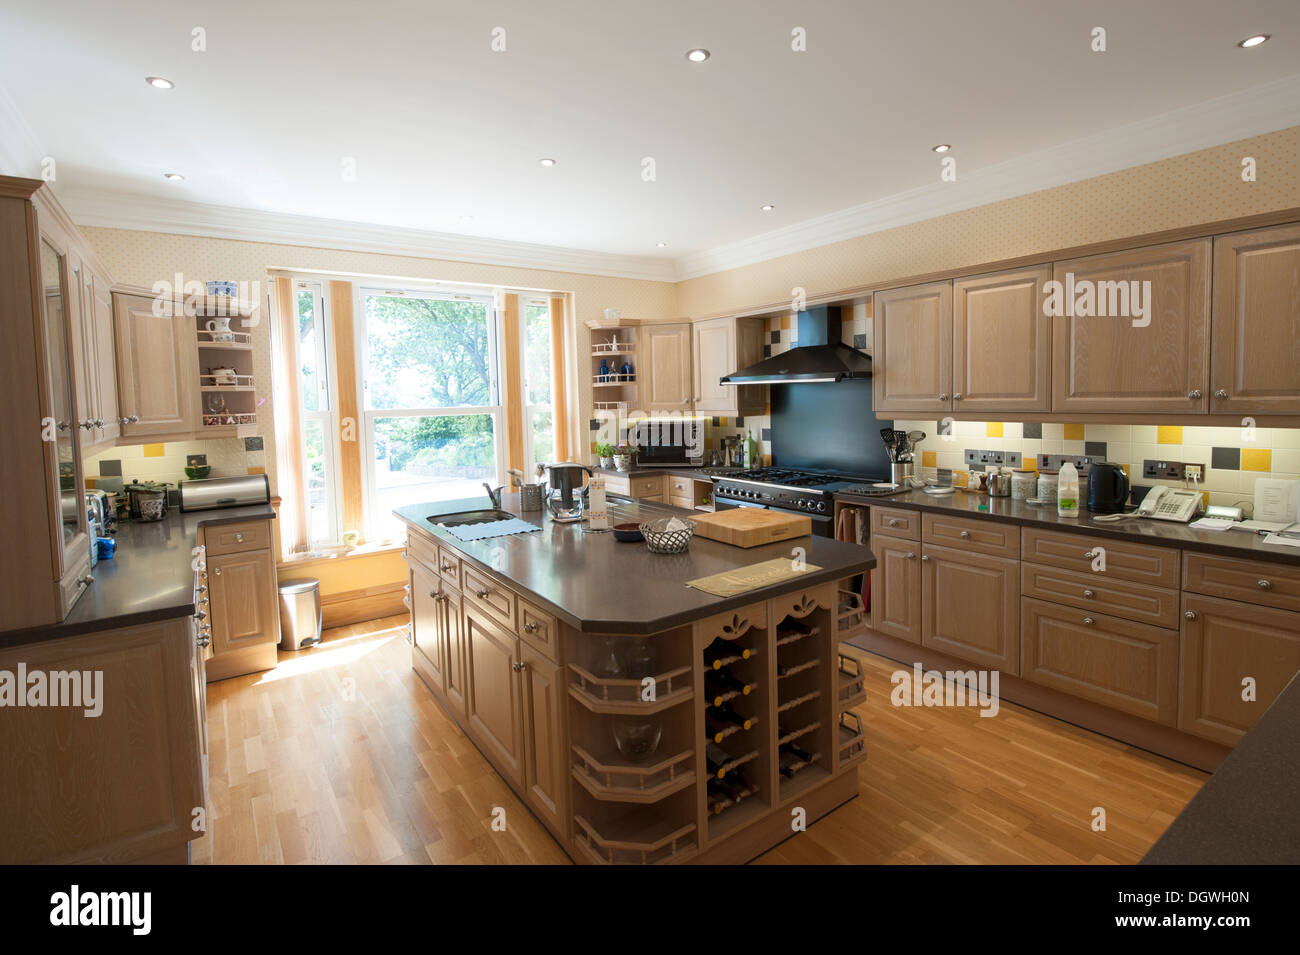 Modern through kitchen with central island cooker Stock Photo